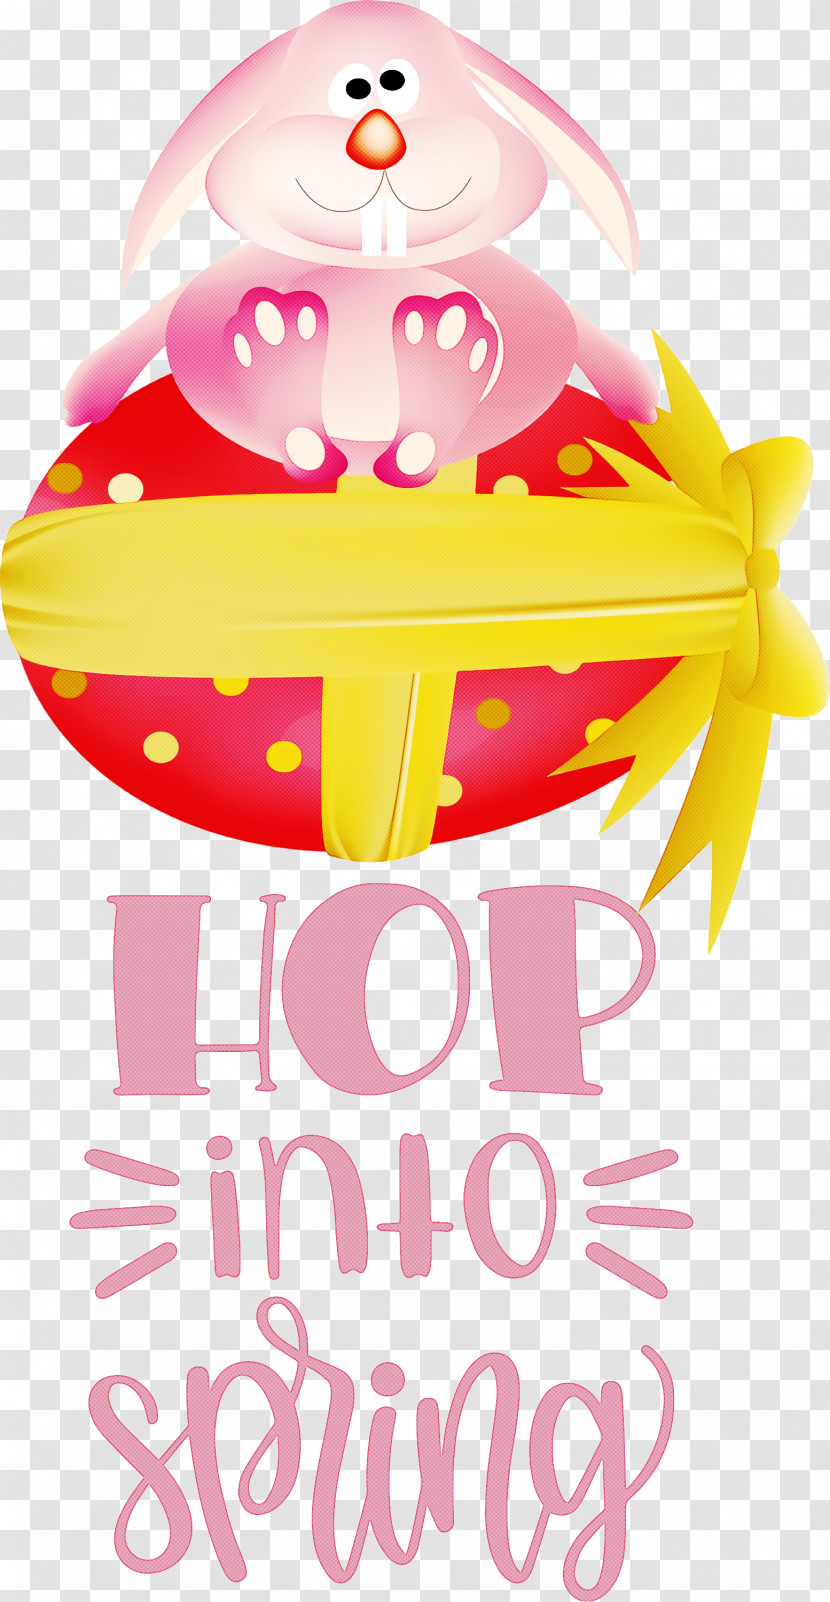 Hop Into Spring Happy Easter Easter Day Transparent PNG